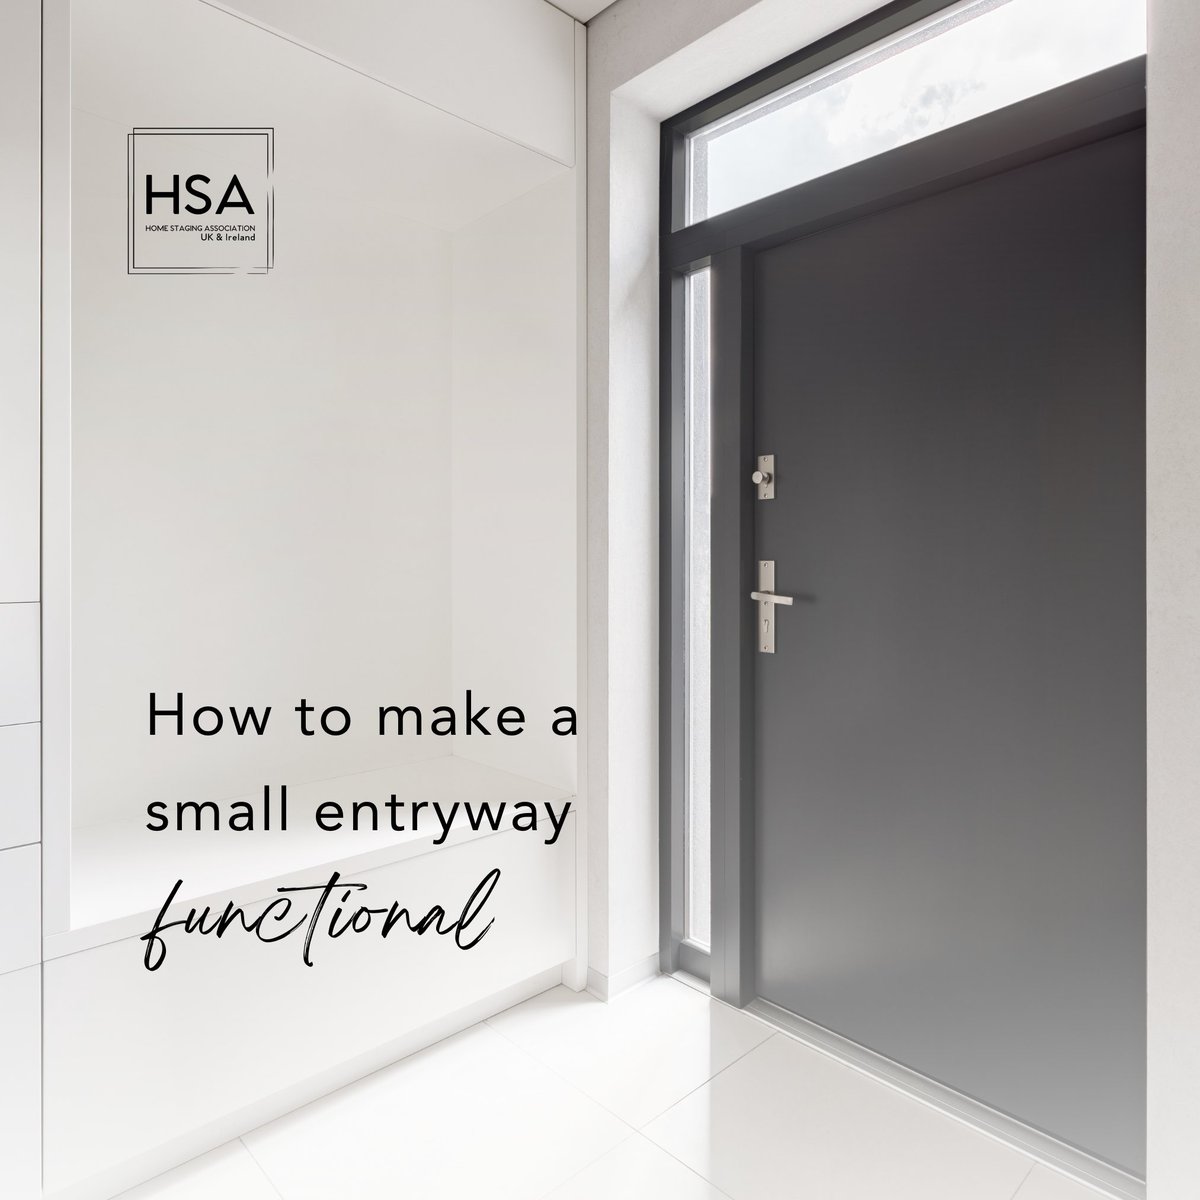 Small entryways. You either love them or hate them! Check out our Facebook and Instagram pages for decorating tips. 

#homestagingtips #smallentrywaysolutions #functionalentryway #homestaginguk #homestagingireland #hsauk